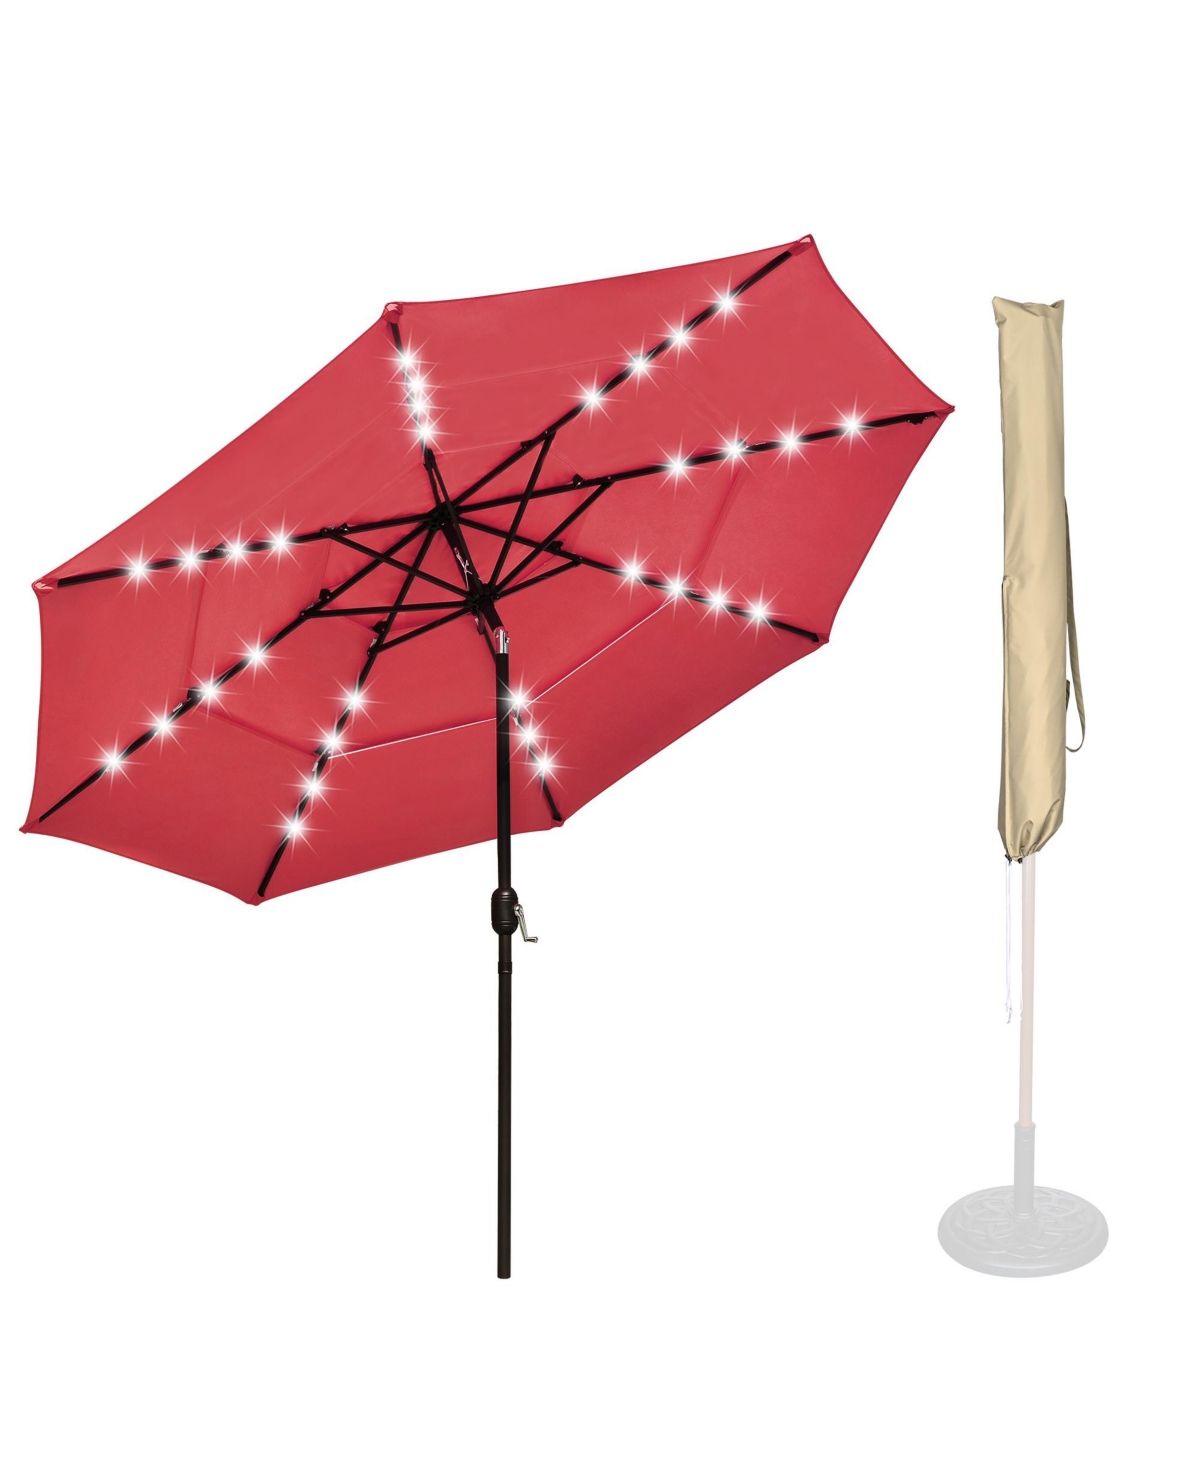 10 Ft 3 Tier Patio Umbrella with Protective Cover Solar Led Crank & Tilt Hotel - Red